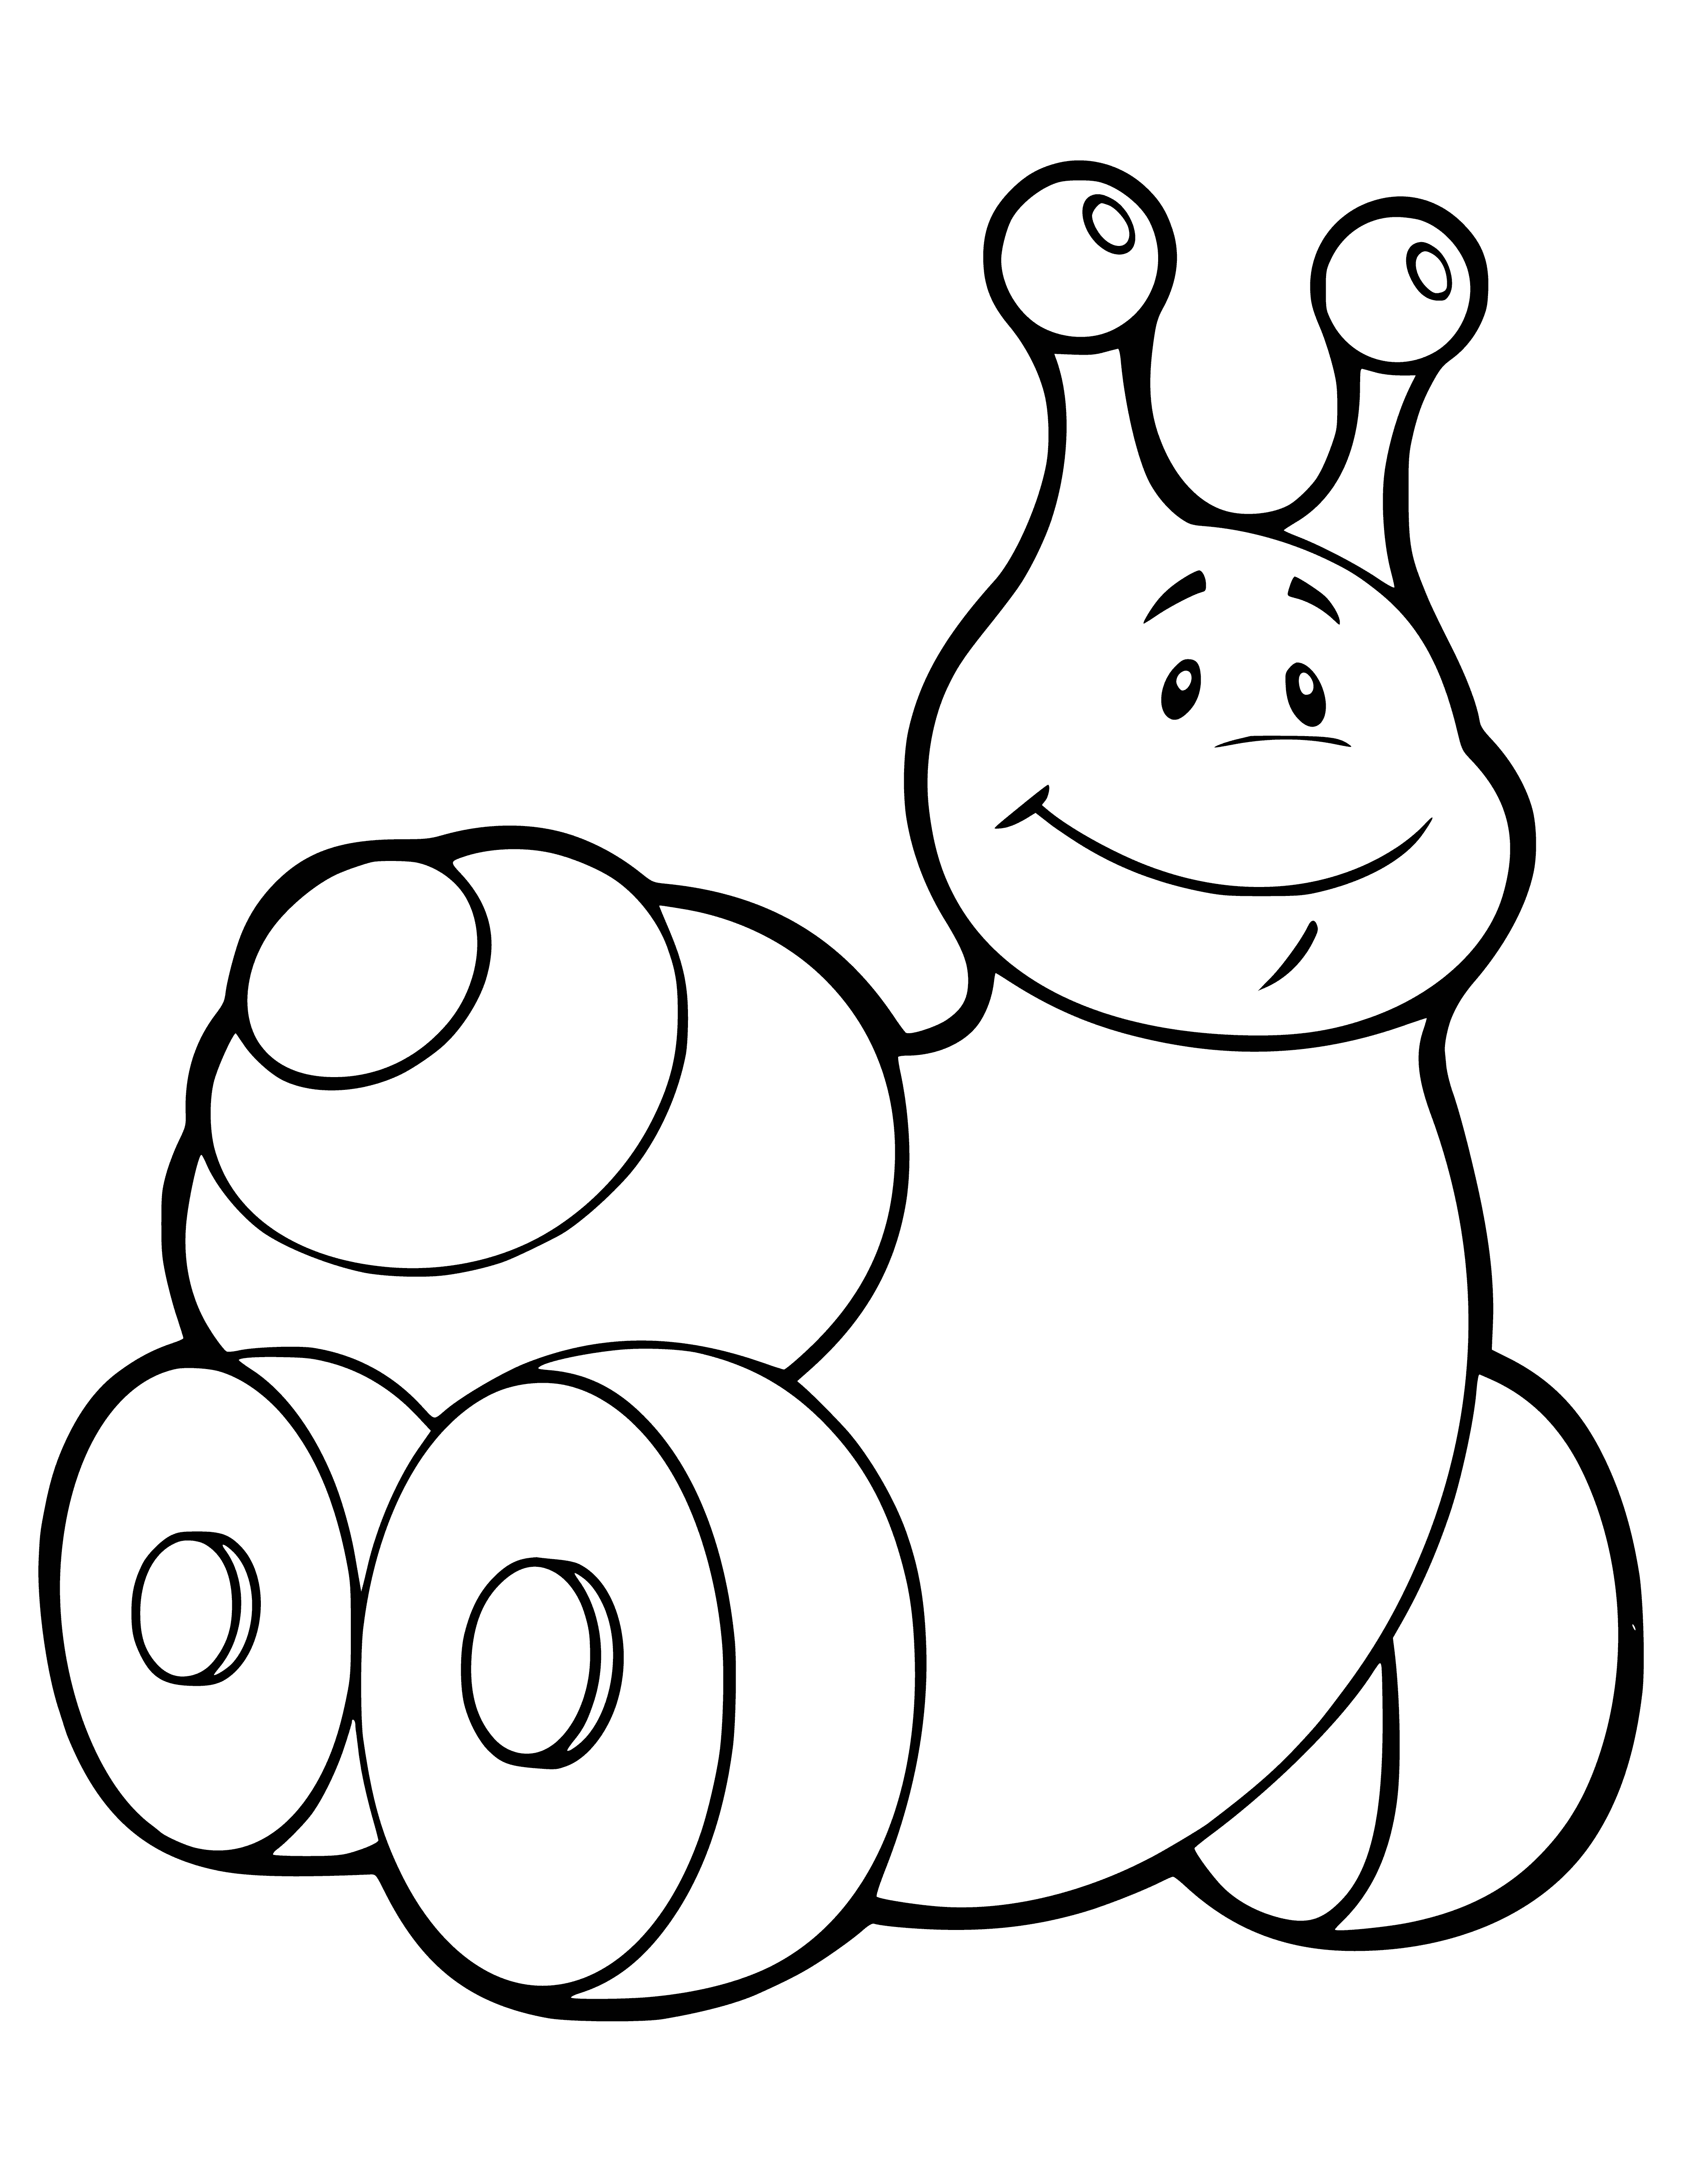 coloring page: Plastic/rubber snail toy, usually has a shell on its back. #toys